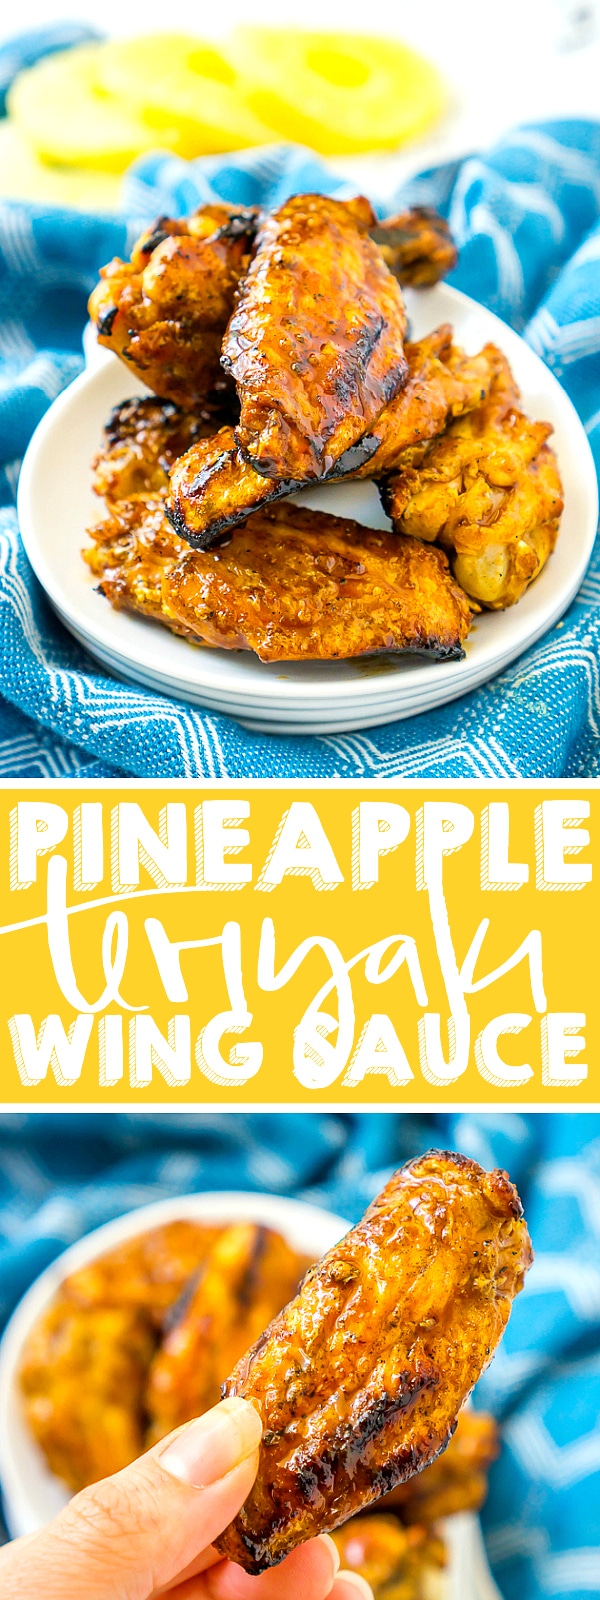 A sweet teriyaki sauce enhanced with pineapple and ginger to make a delicious Pineapple Teriyaki Chicken Wings sauce. This recipe is a hit with adults and kids alike, perfect for your next outdoor BBQ or game day party!  | THE LOVE NERDS #chickenwingsaucerecipe #chickenwings #grilledchickenwings #bakedchickenwings